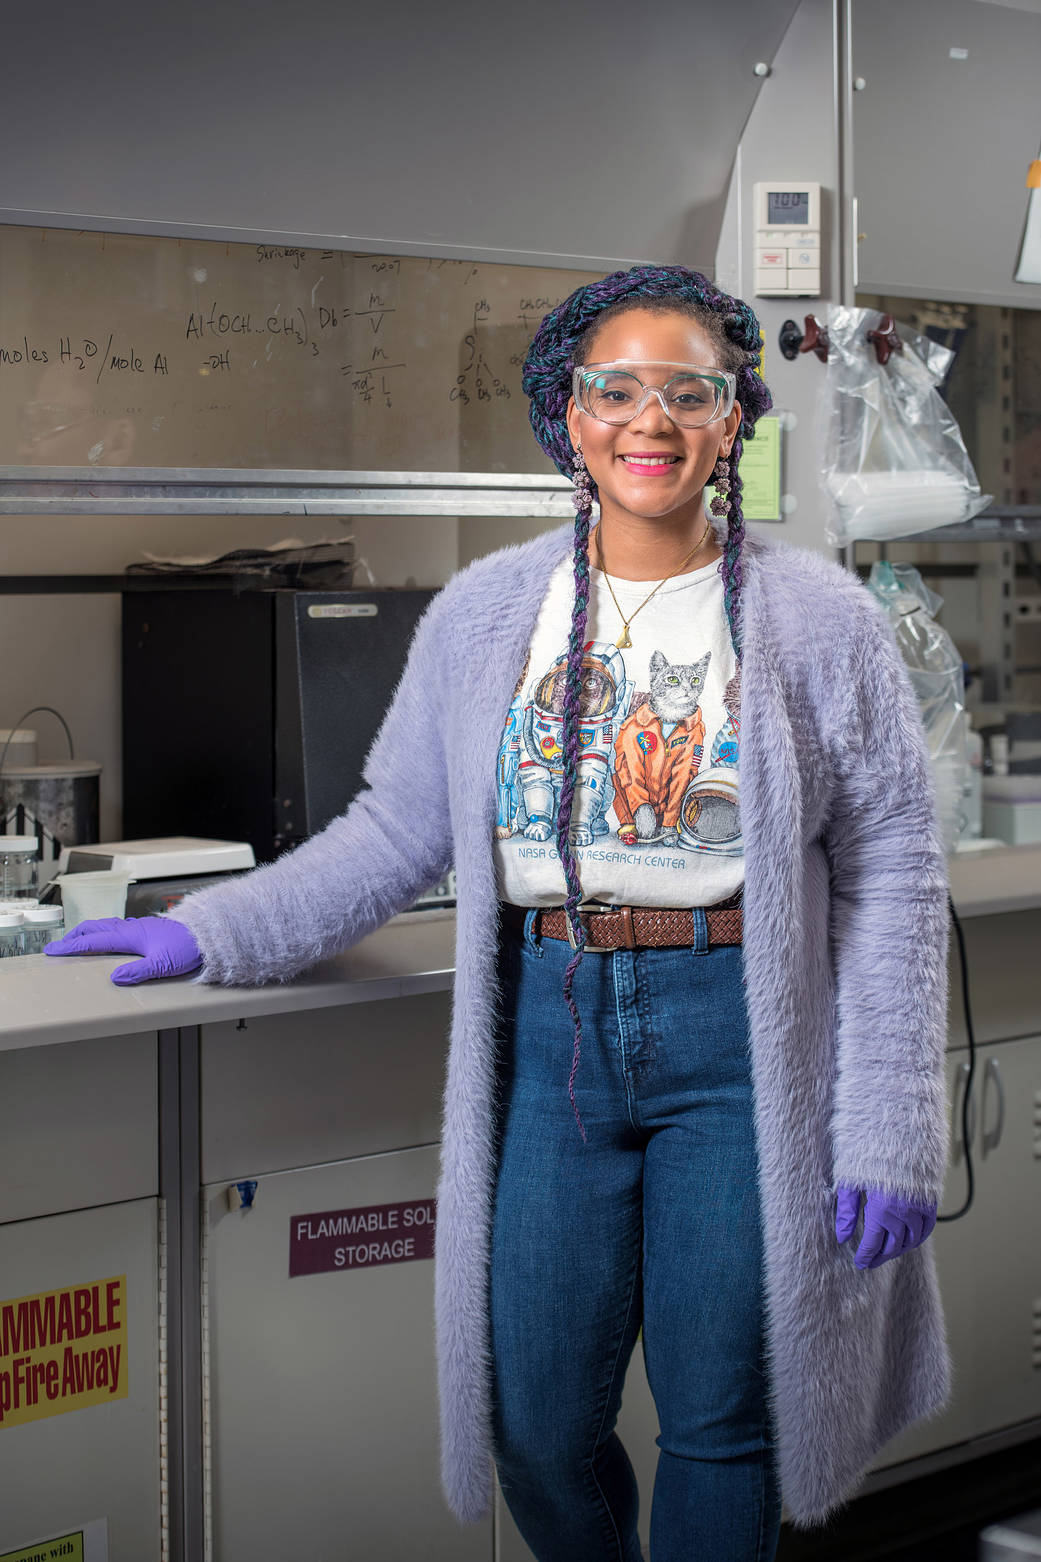 Young, black woman with safety glasses, dressed in t-shirt, jeans, and purple fuzzy sweater with purple gloves, faces camera while standing in laboratory